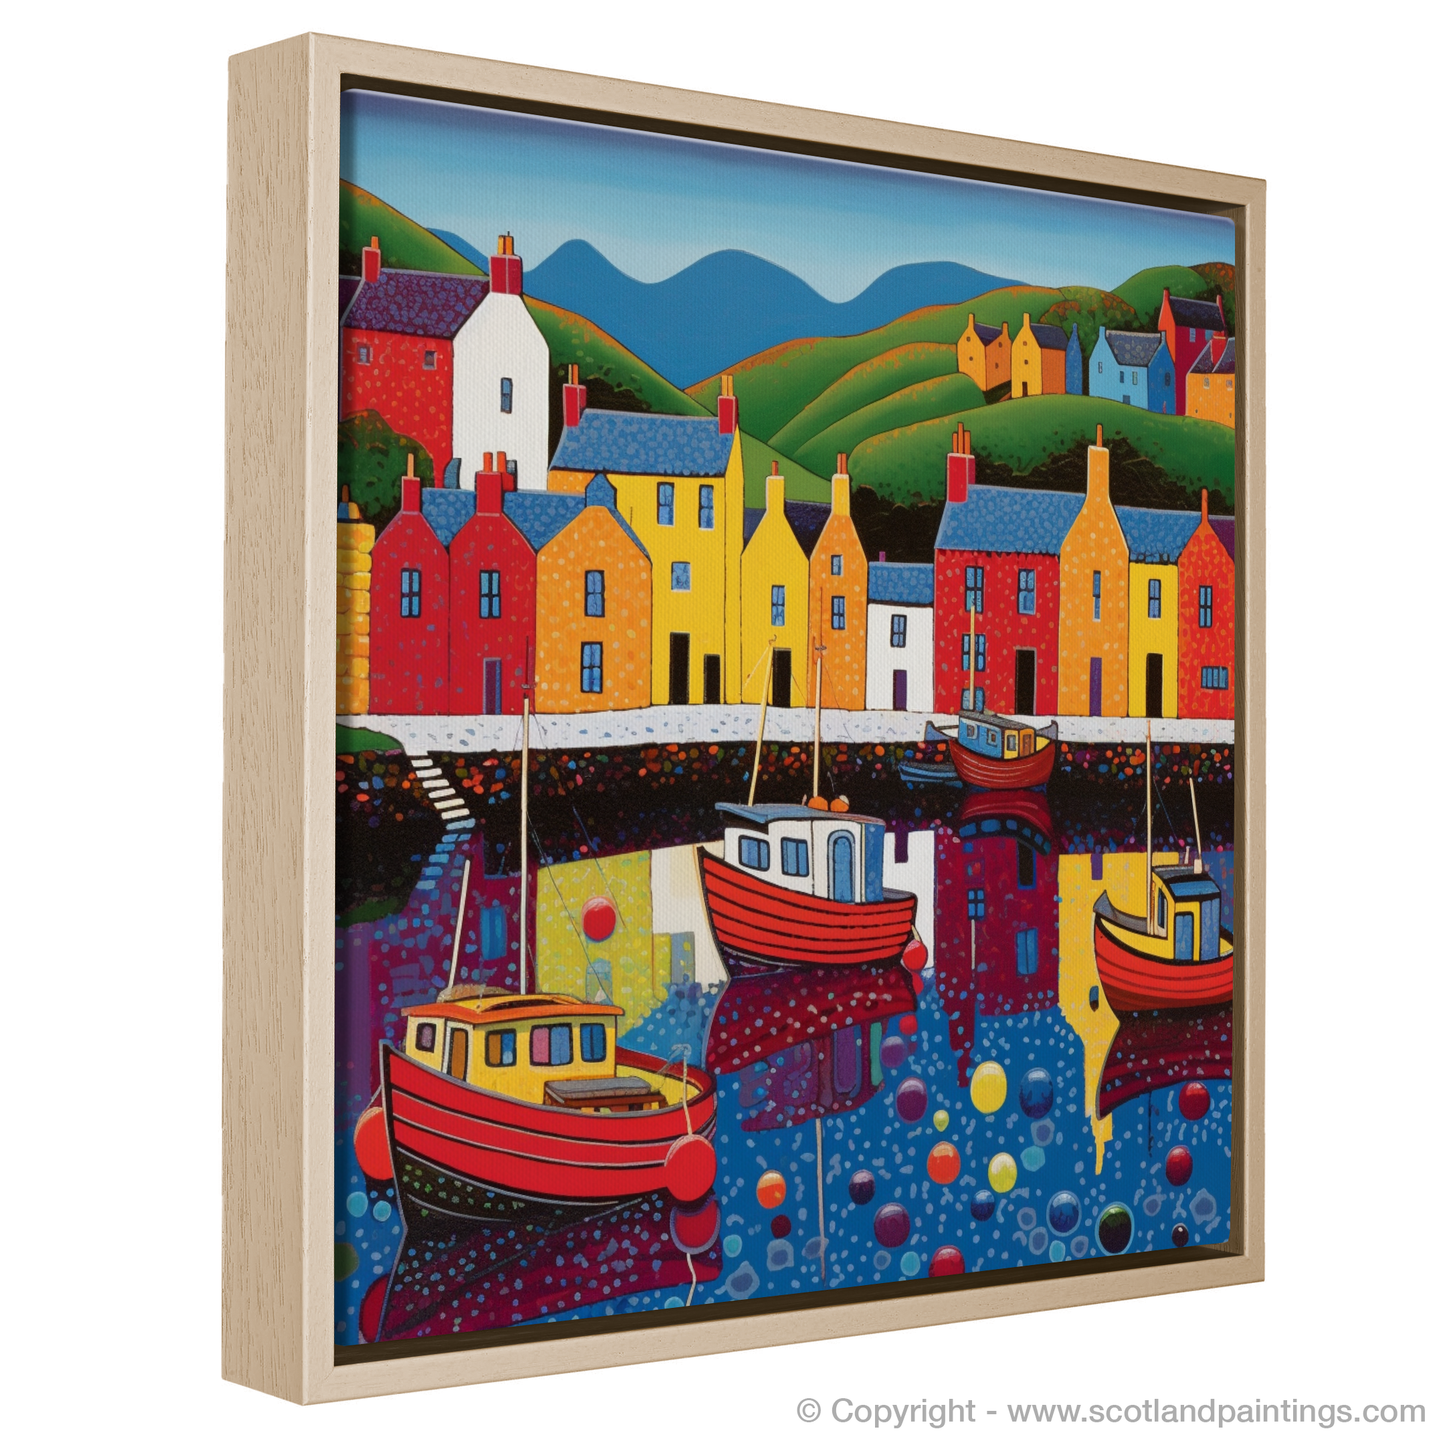 Pop Art Portree: A Kaleidoscope of Colour at Isle of Skye Harbour